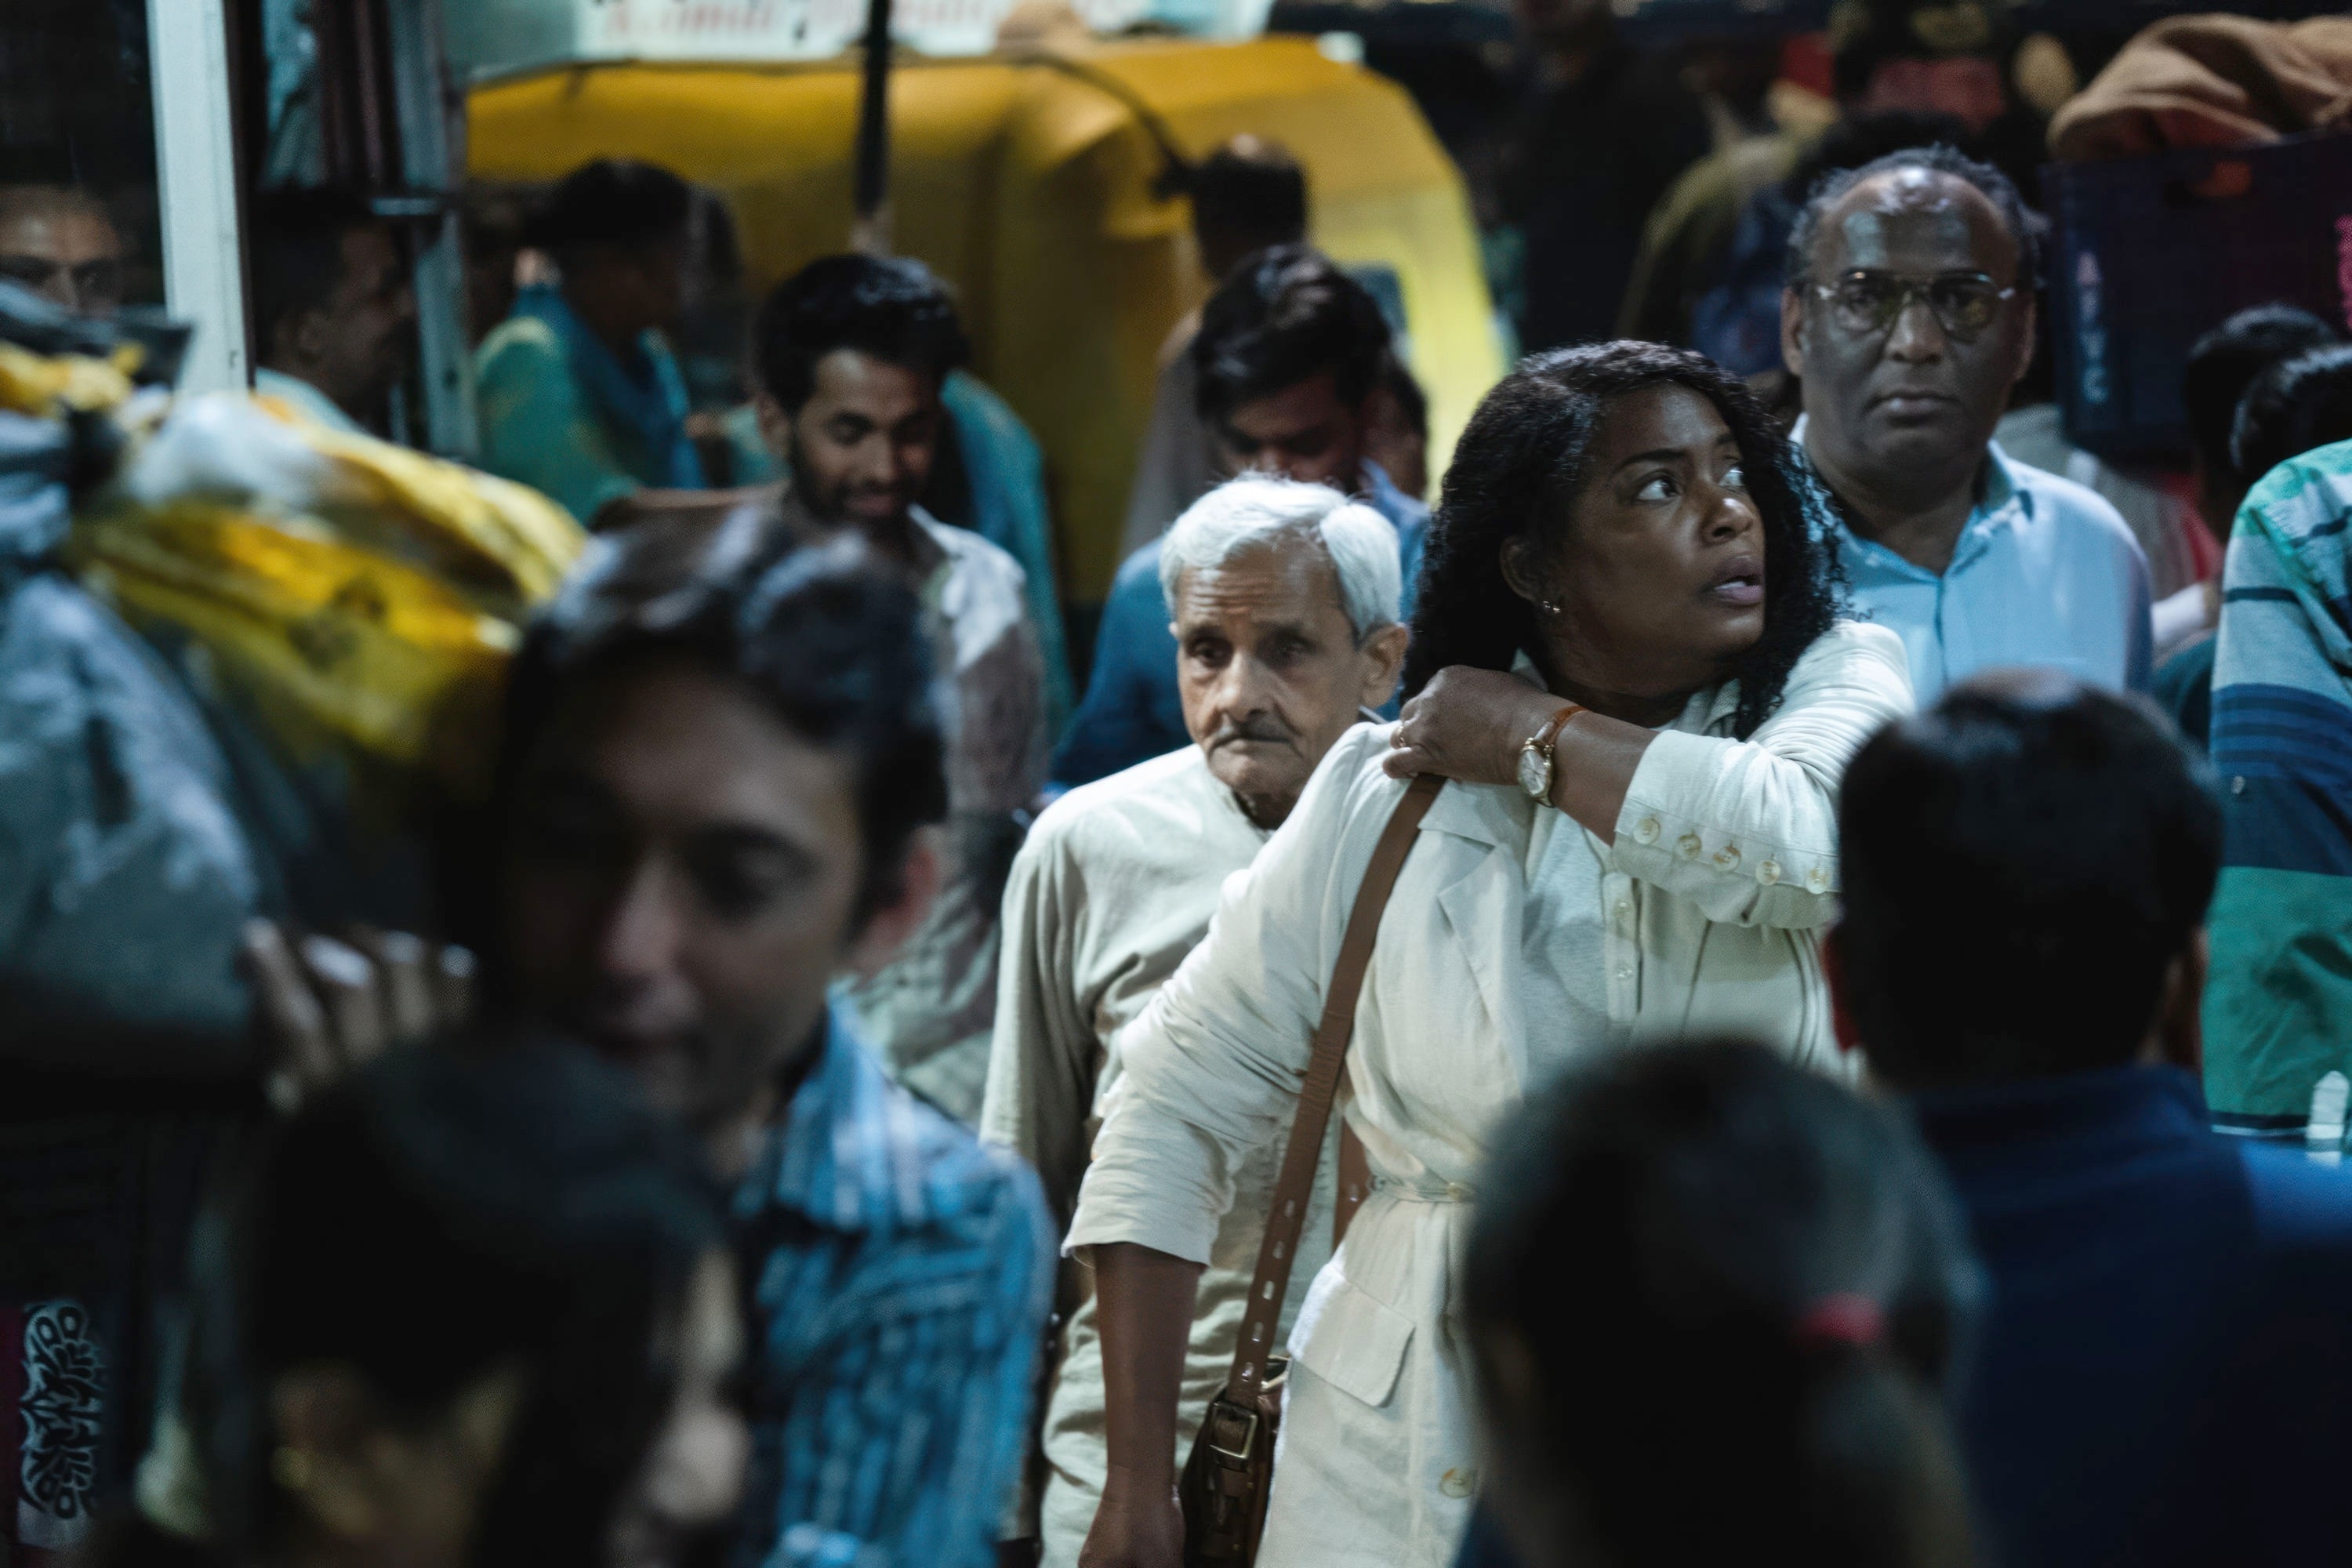 Aunjanue Ellis-Taylor in the foreground looking back in a crowded street scene, with onlookers and a tuk-tuk in the background in a scene from &quot;Origin&quot;